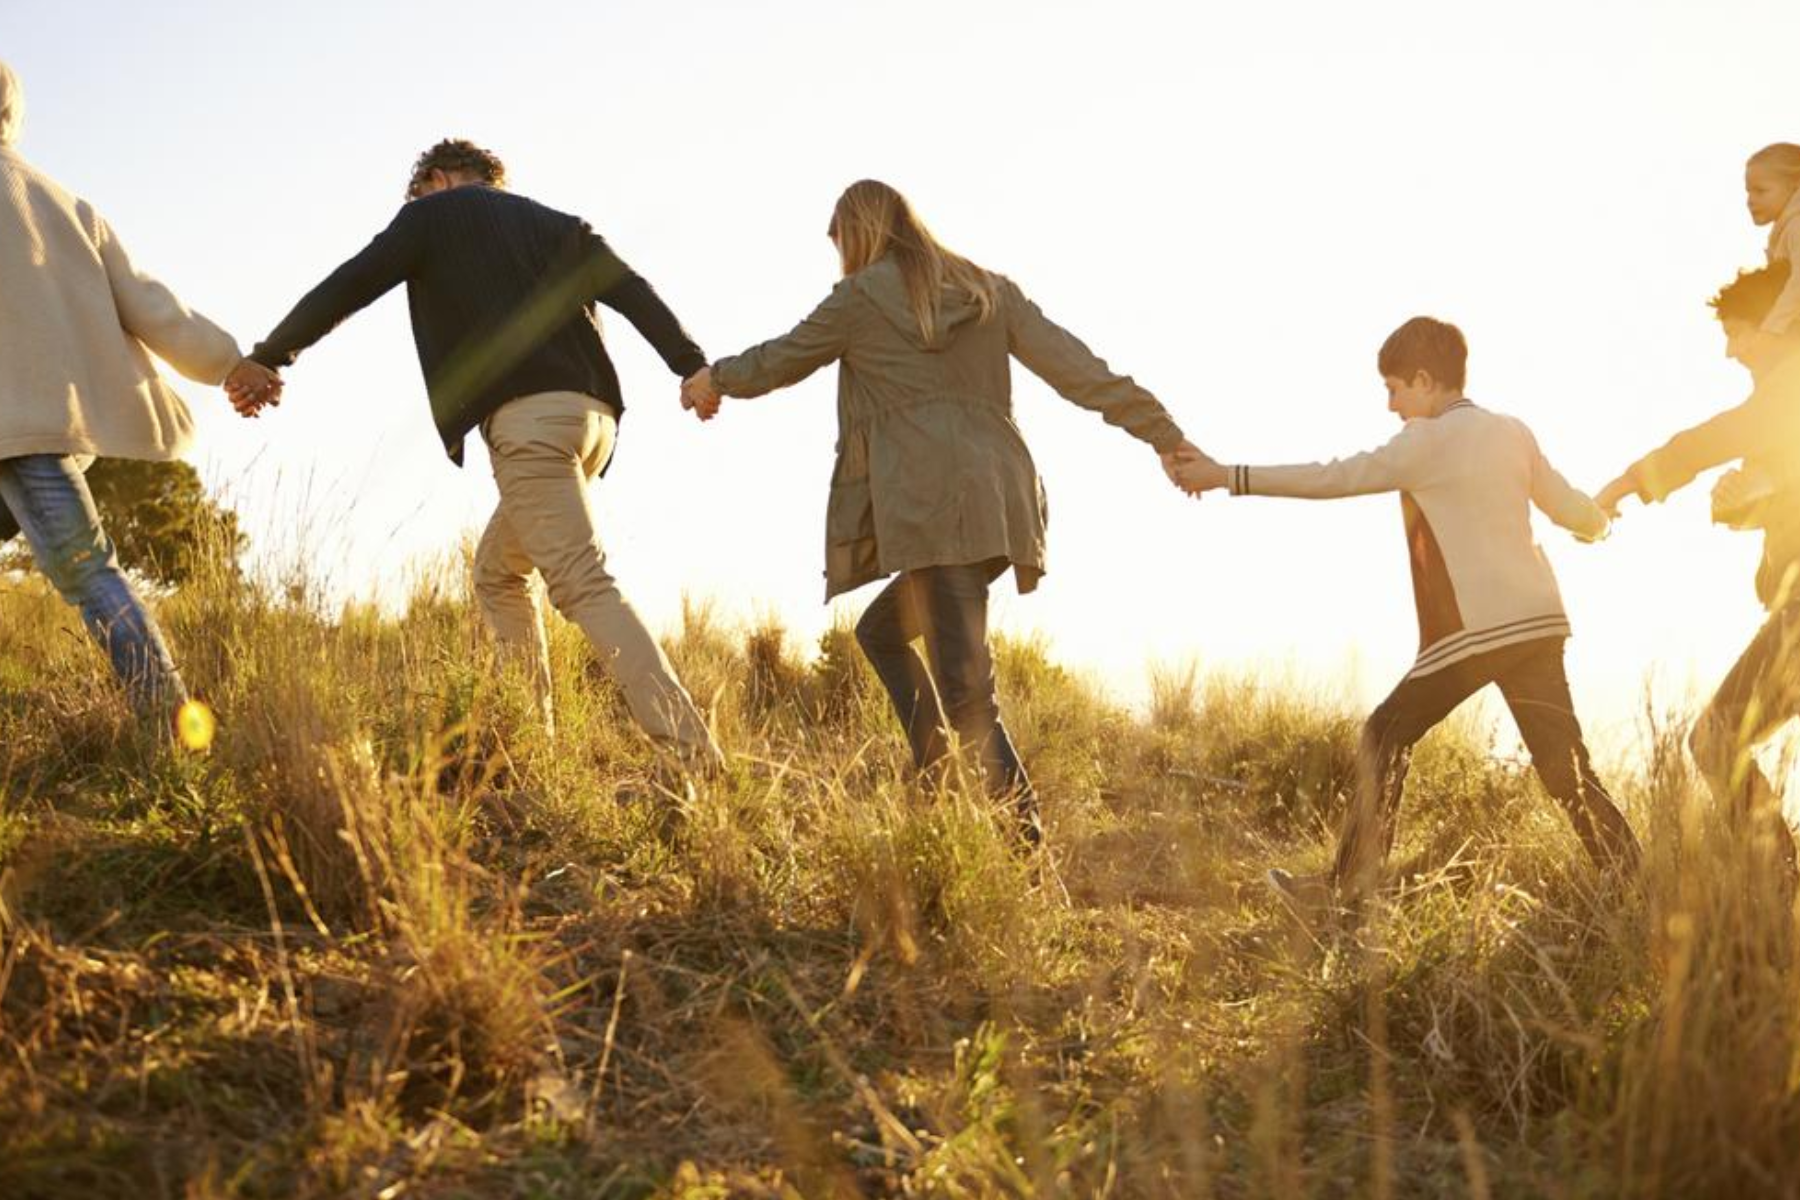 A family walks together on a grassy mountain, holding hands